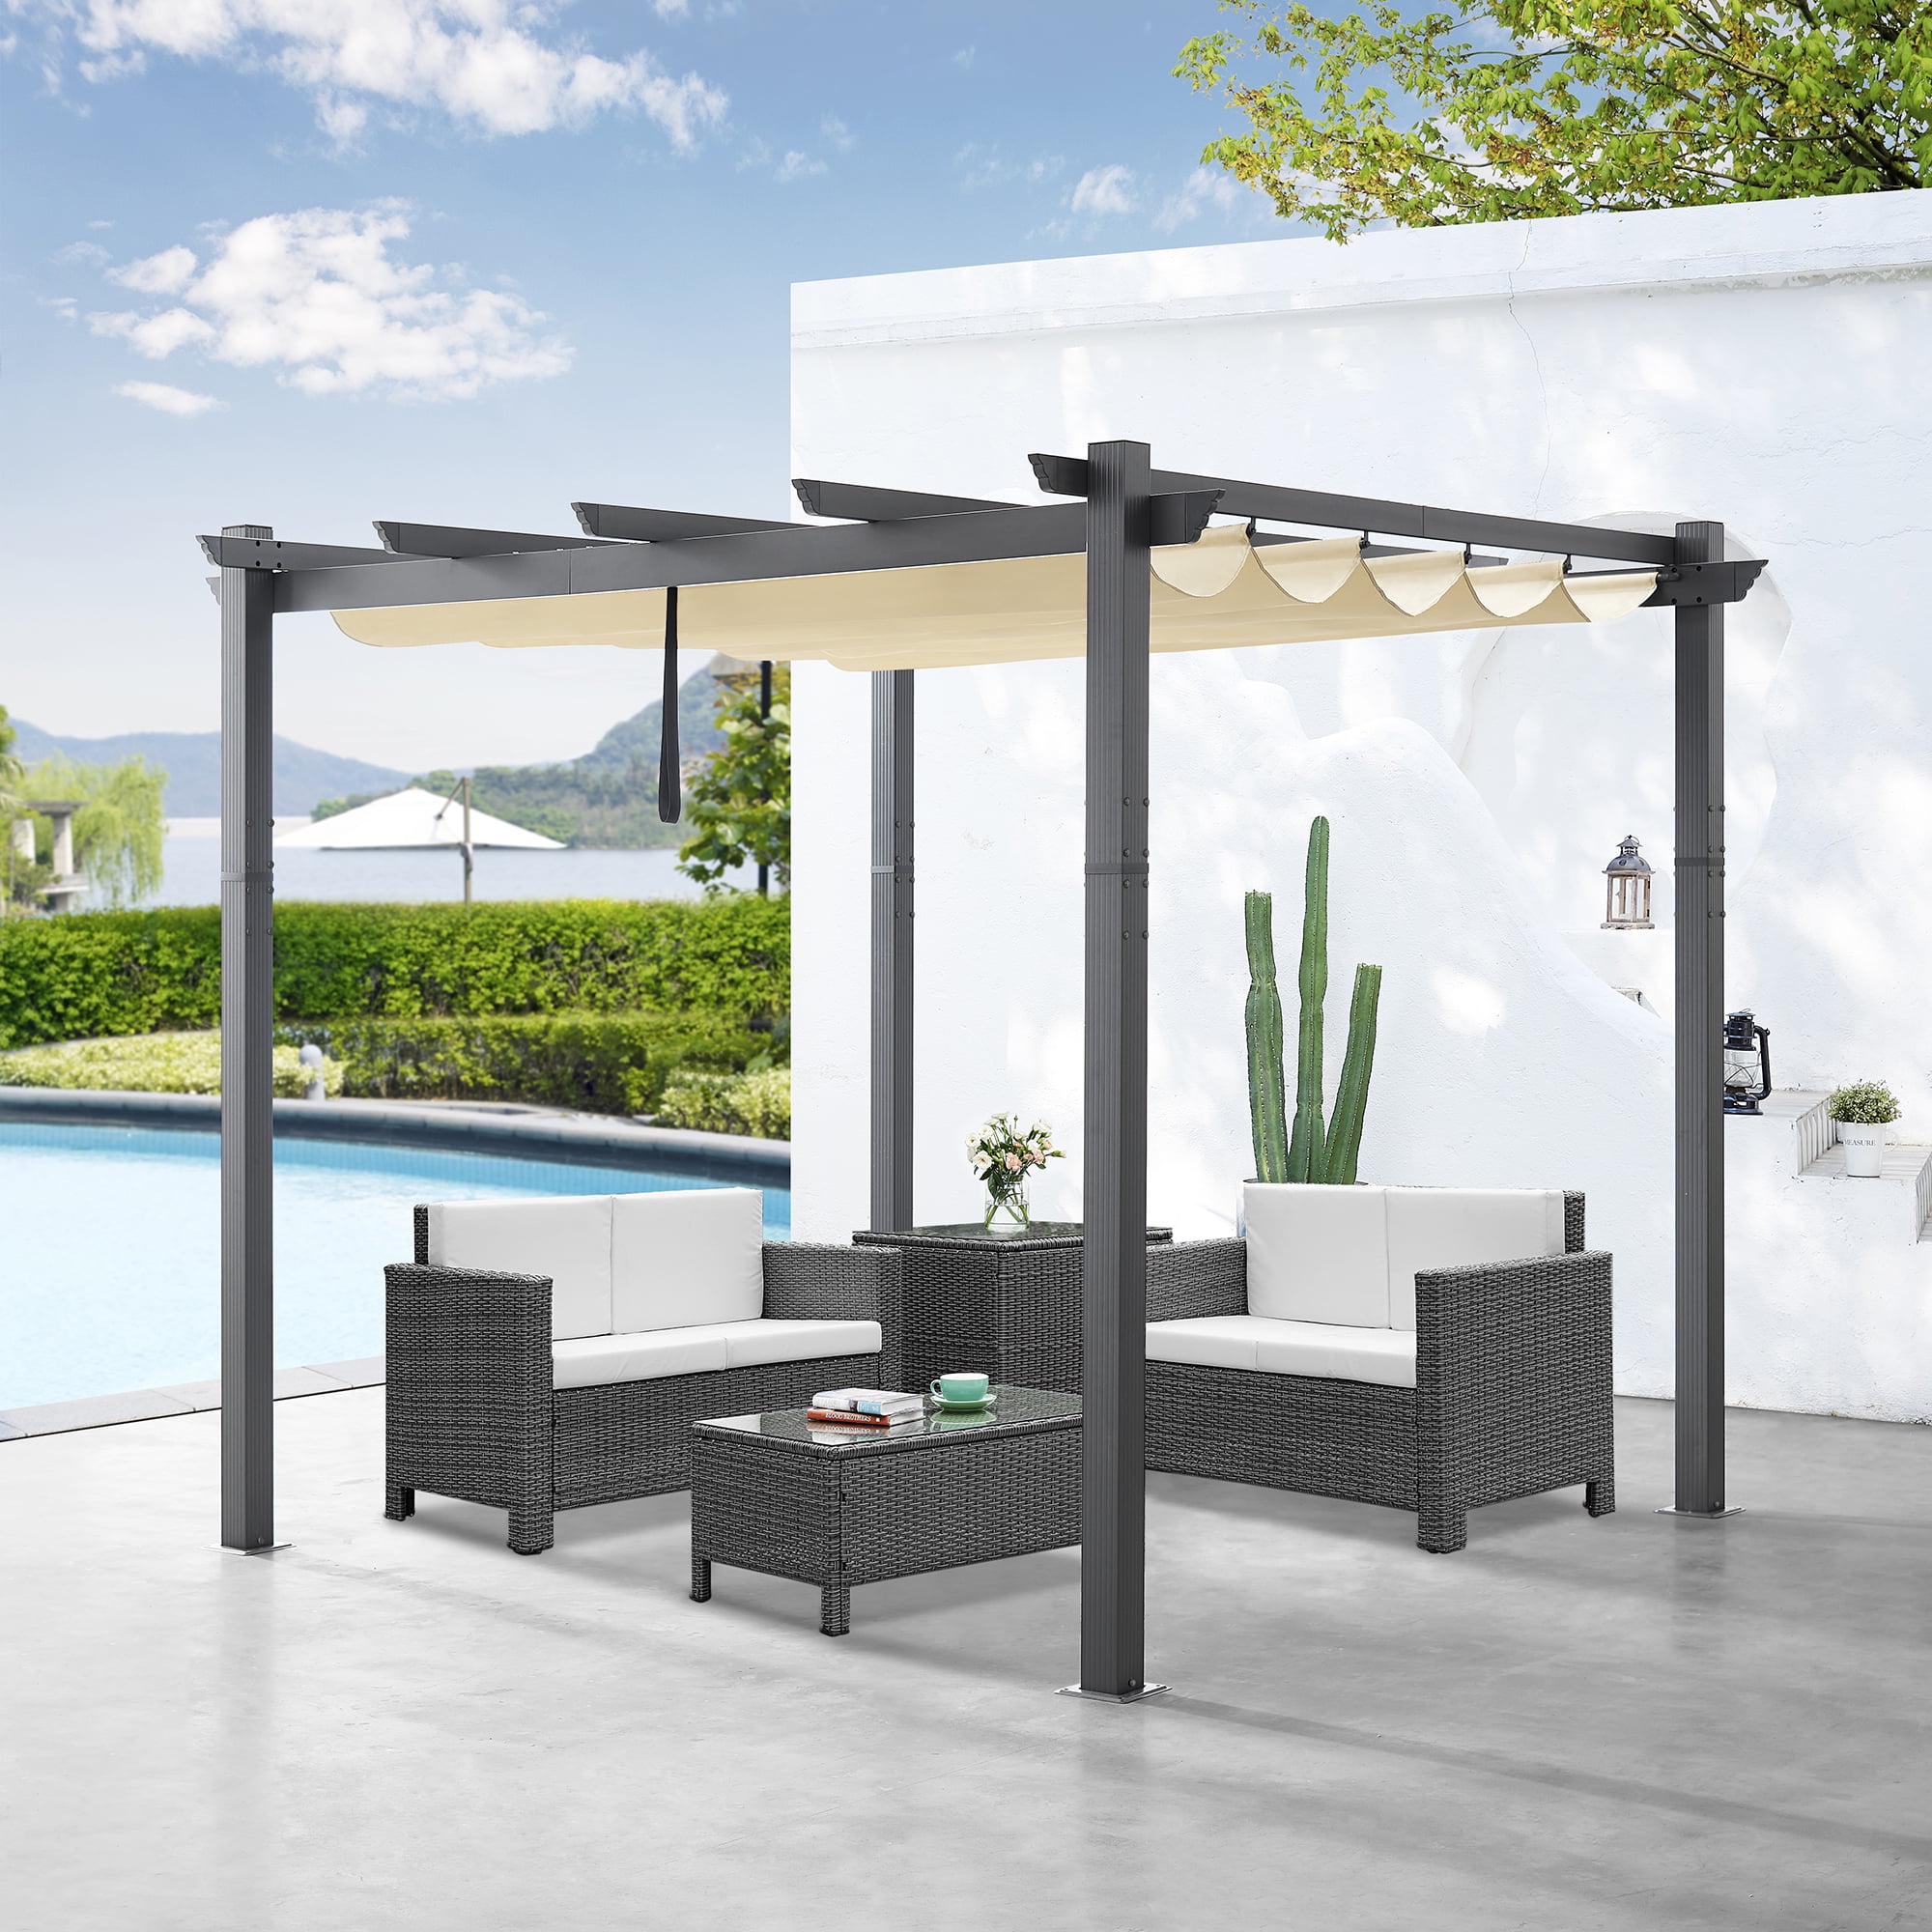 Radiance 4' x 6' Crank Operated Roll Up Solar Shades Coconut Brown 